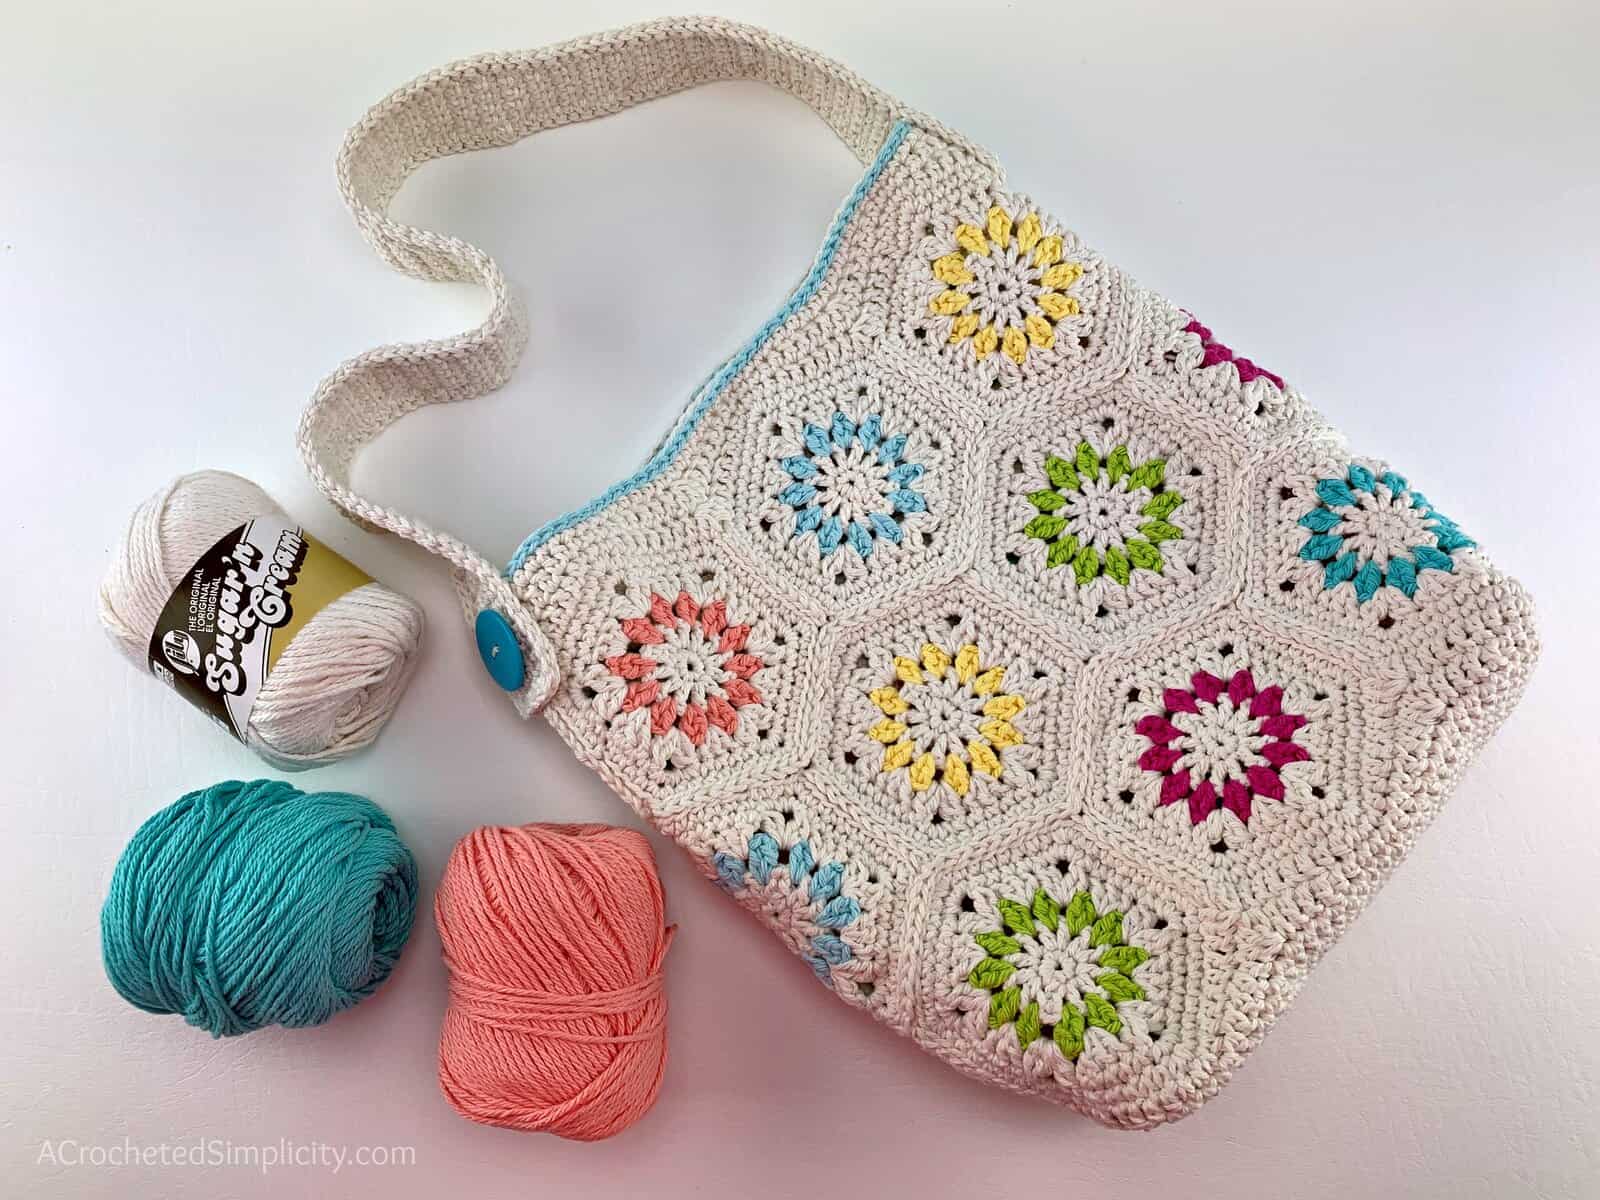 Cream colored hexagon motif crochet tote bag with bright color accents and cotton yarn.